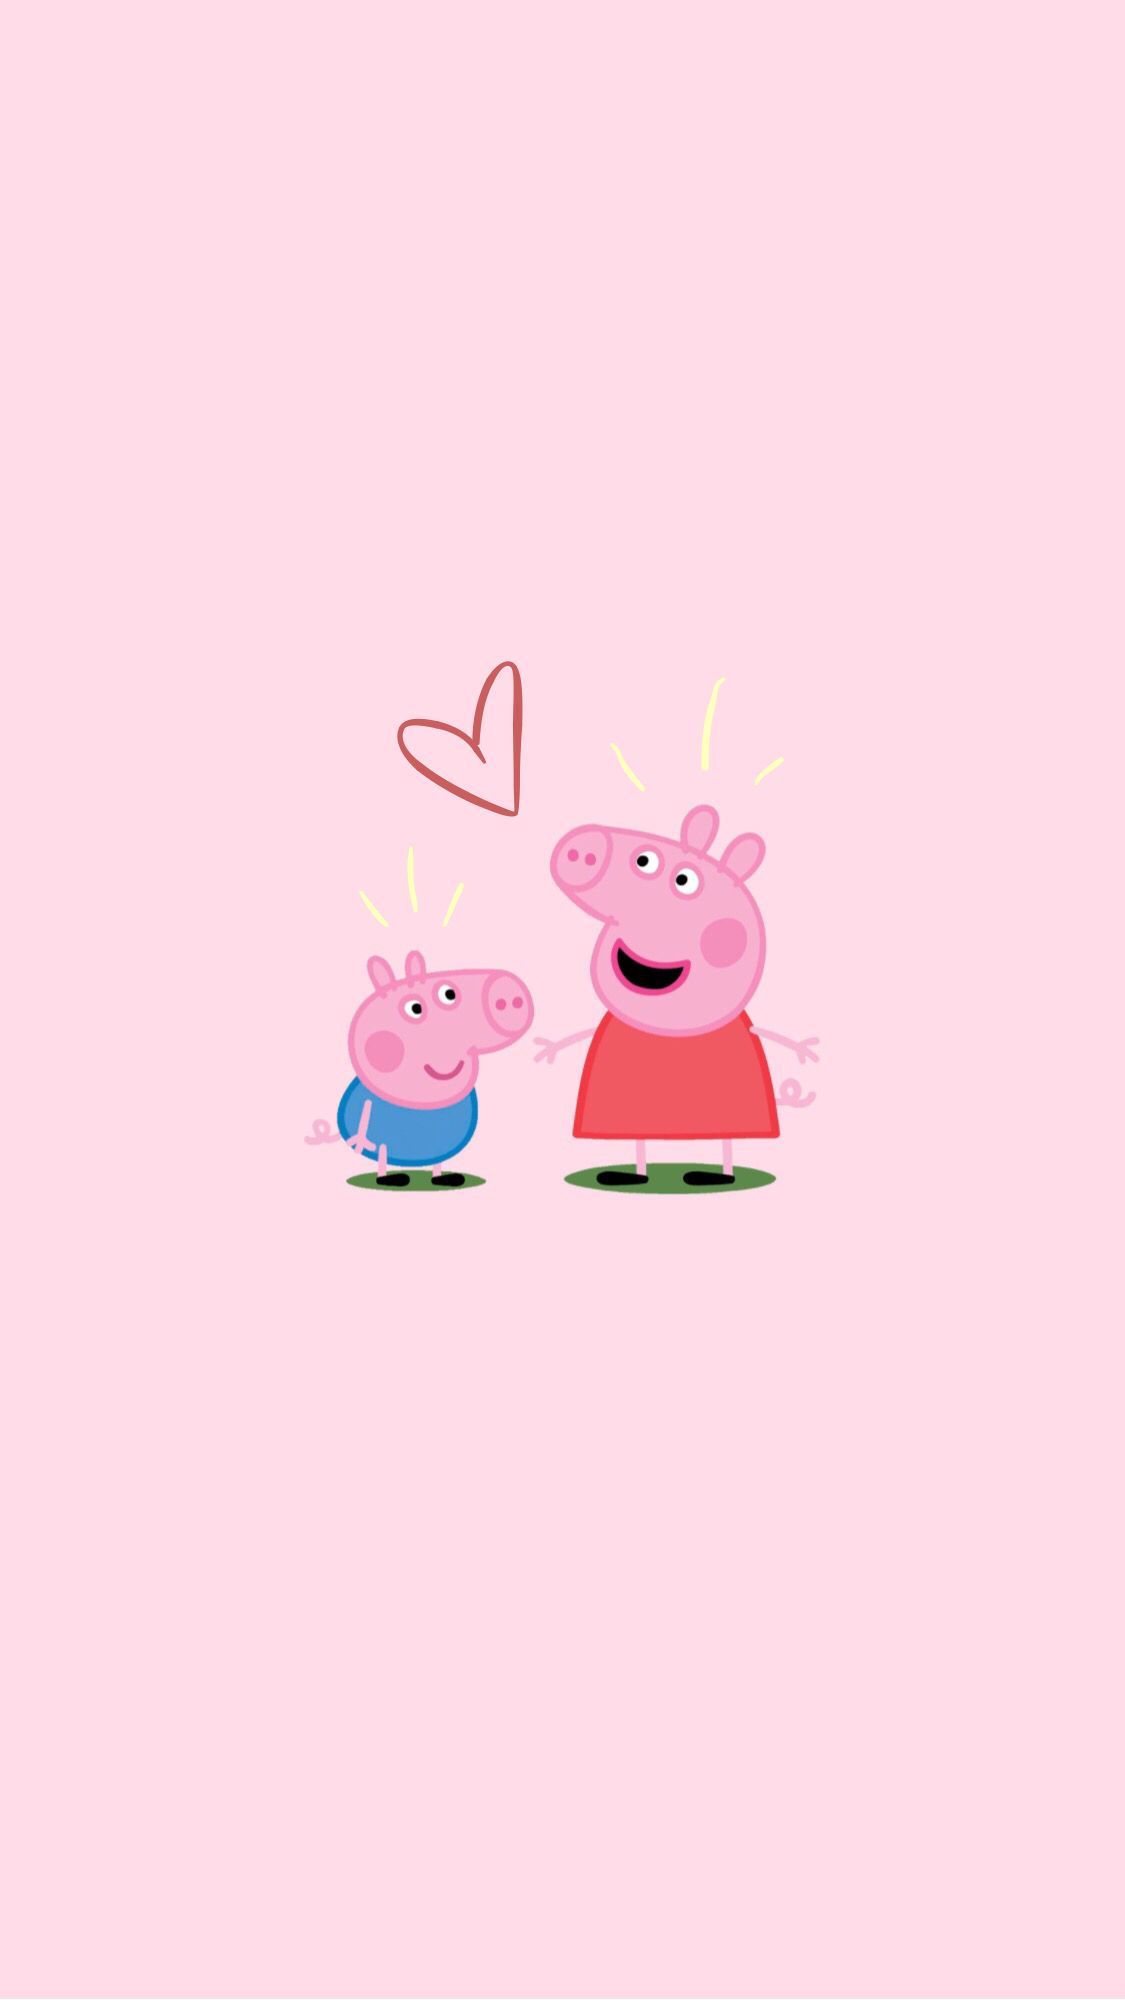 Best Peppa Pig Wallpapers for iPhone, iPad, Android - 2022 Update